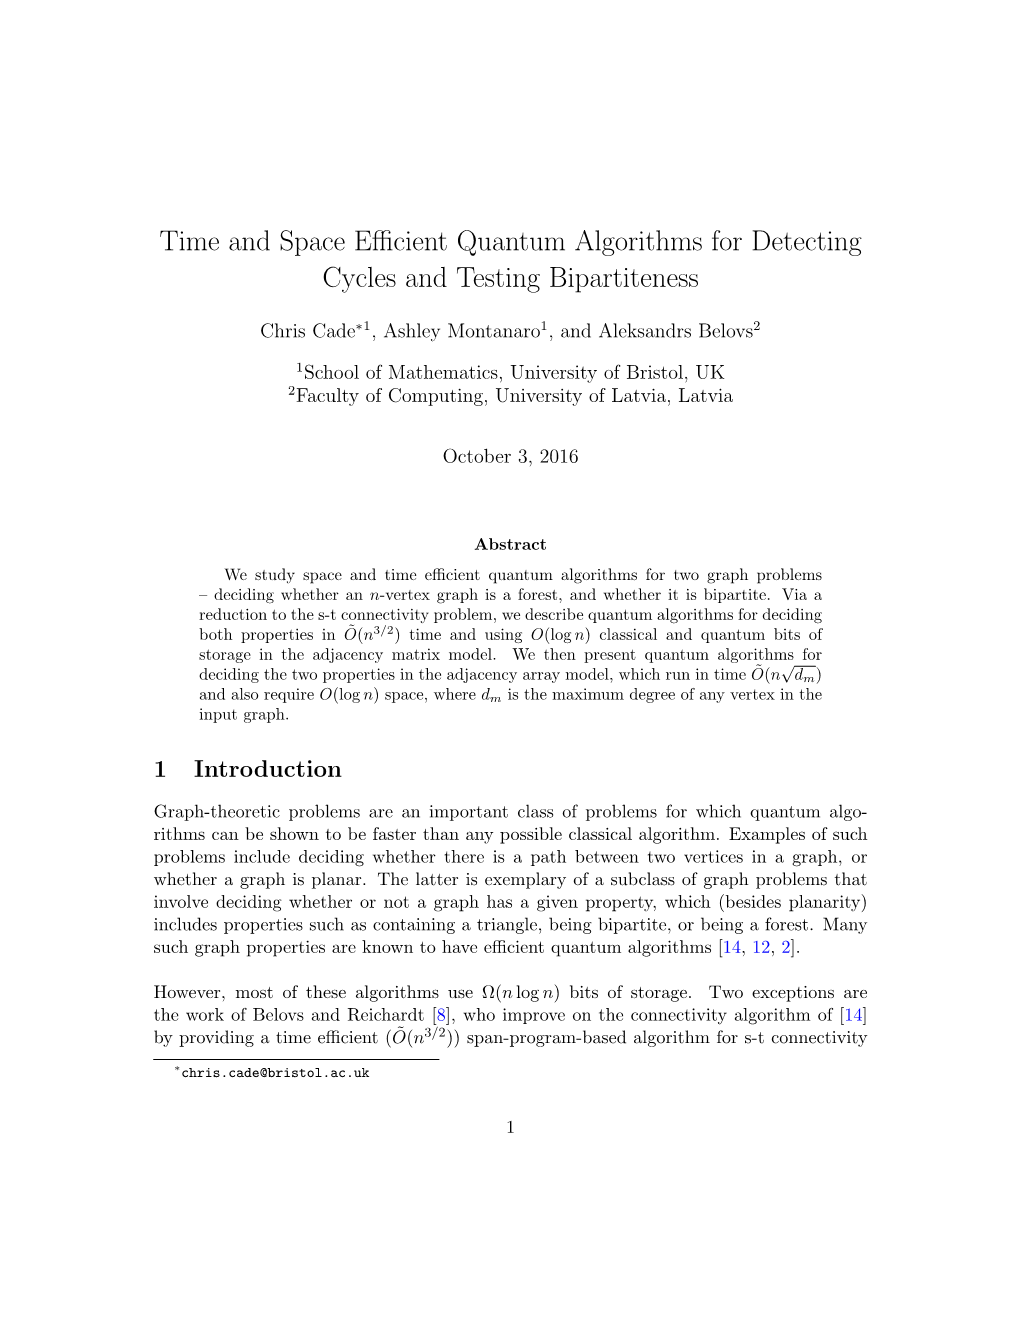 Time and Space Efficient Quantum Algorithms for Detecting Cycles and Testing Bipartiteness